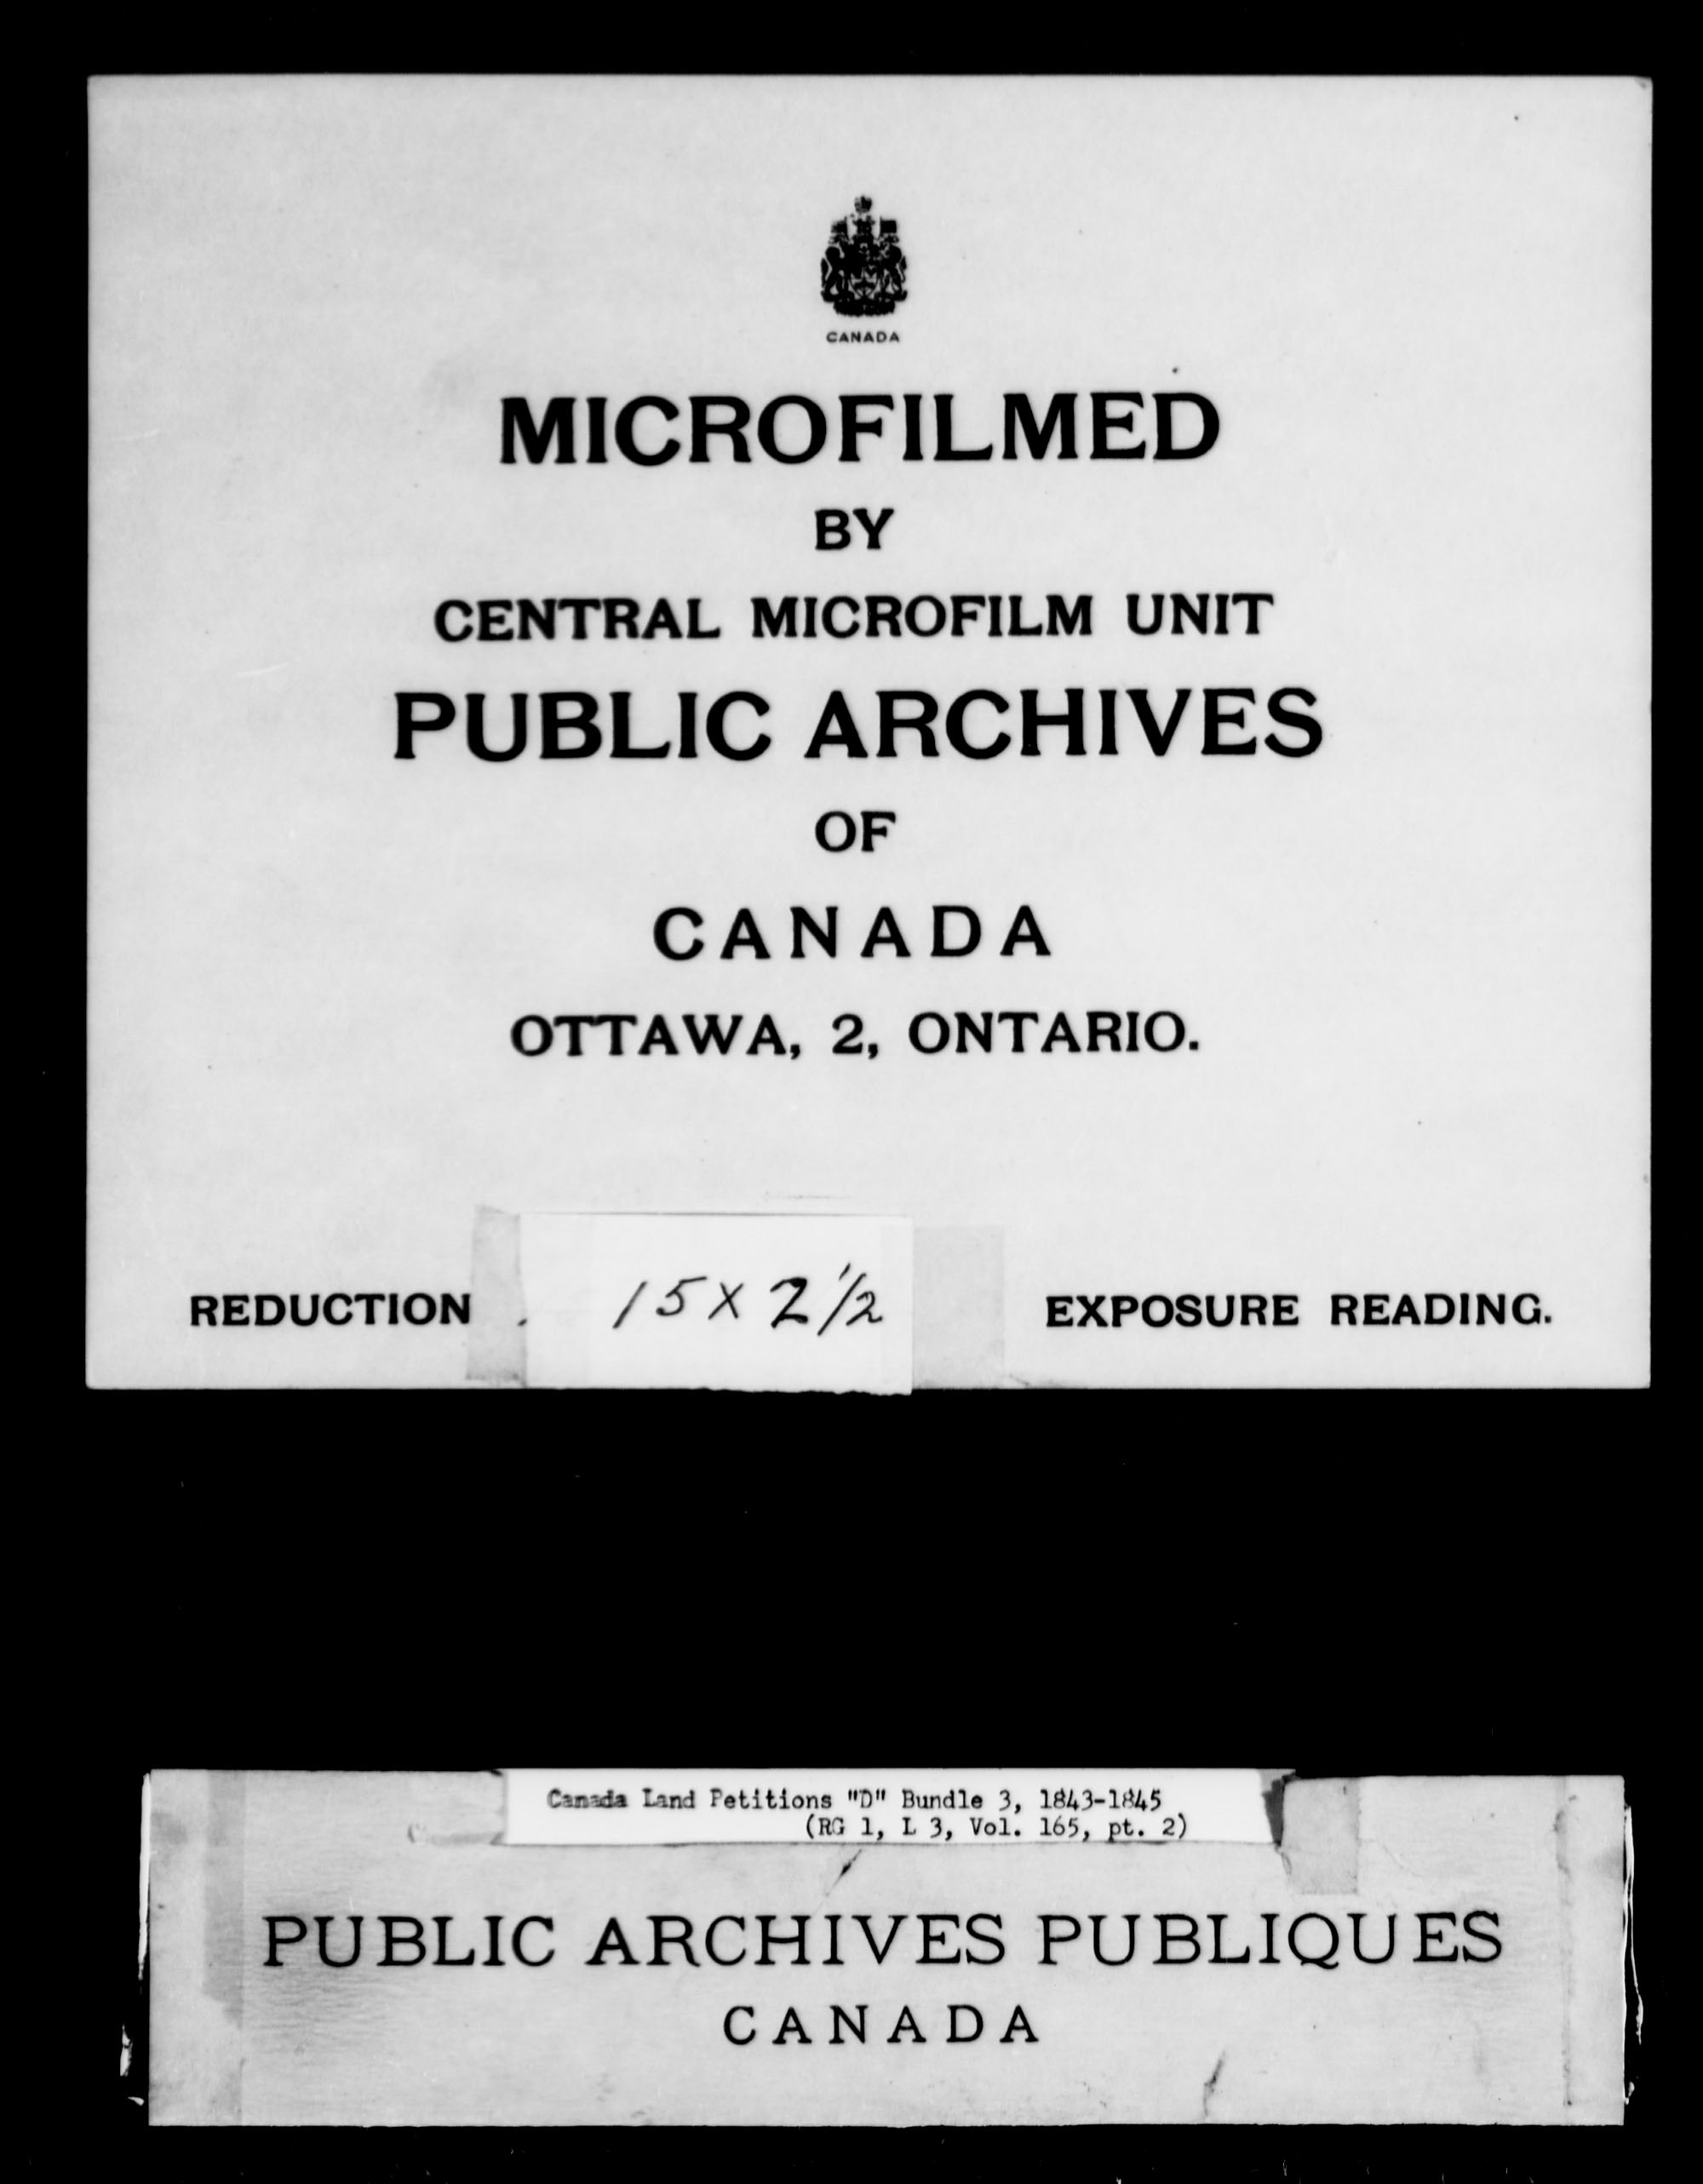 Title: Upper Canada Land Petitions (1763-1865) - Mikan Number: 205131 - Microform: c-1881